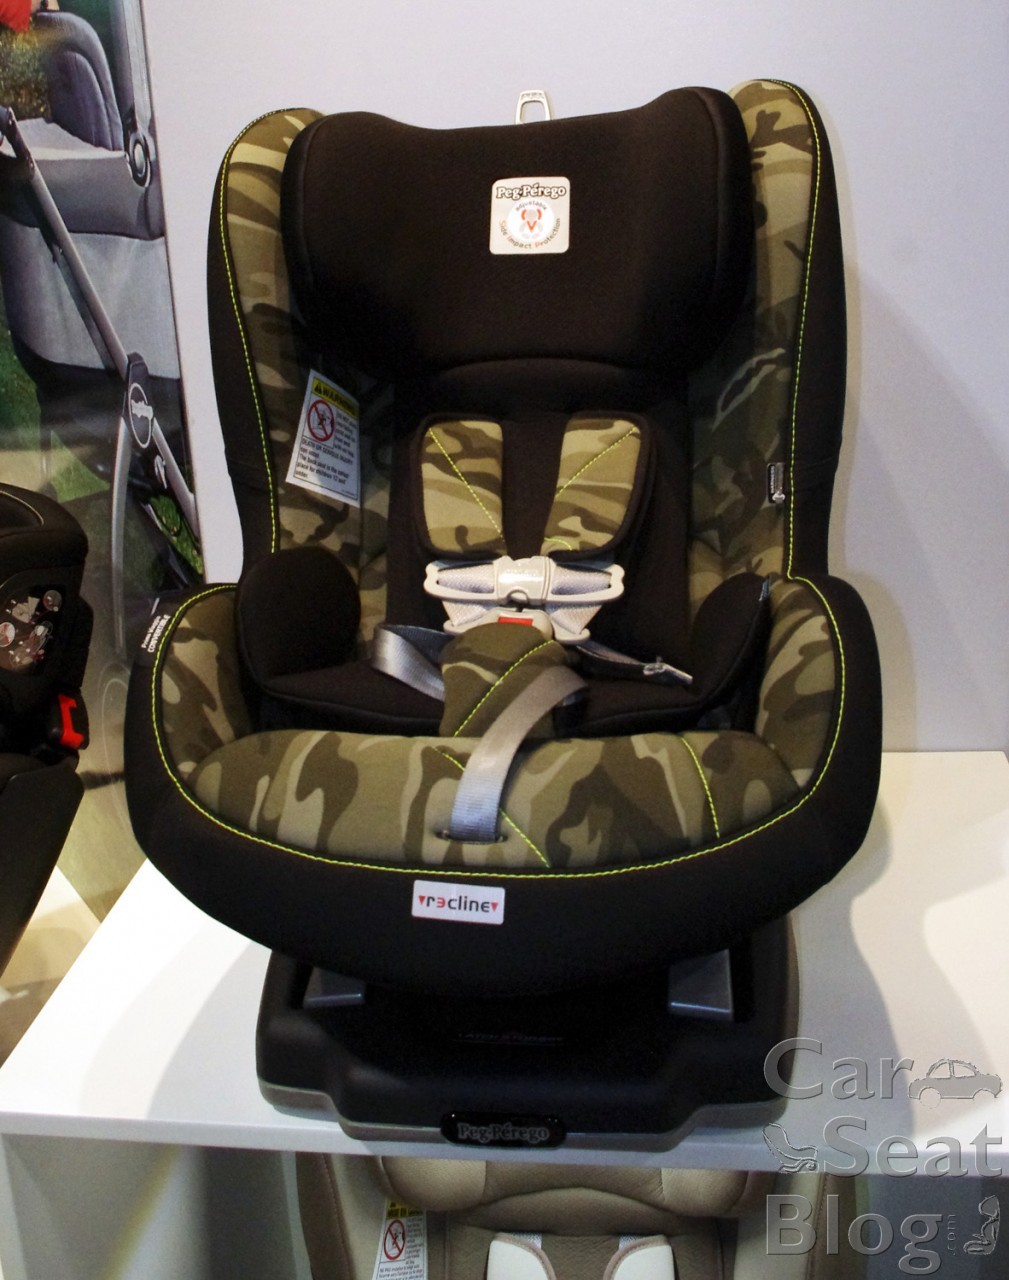 camo baby stroller and carseat combo